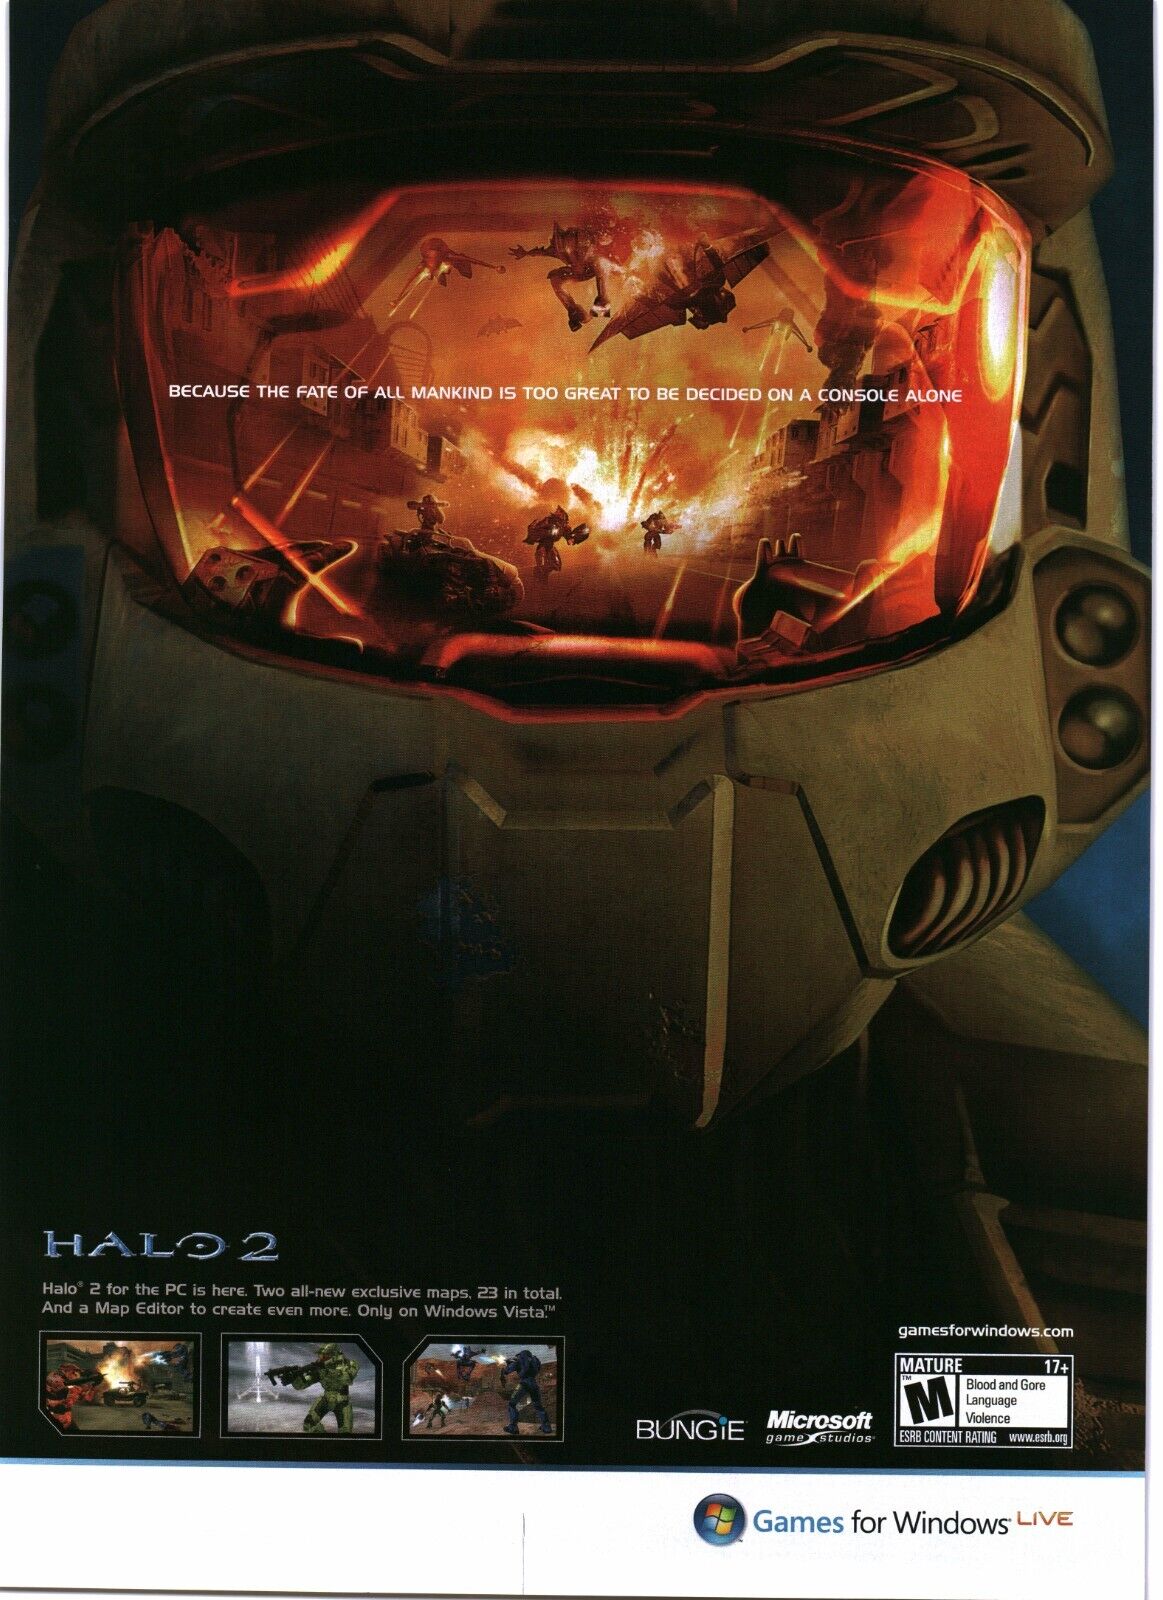 2007 PRINT AD - HALO 2 PC GAME AD - MASTER CHIEF FACE - WINDOWS PC GAME AD ONLY